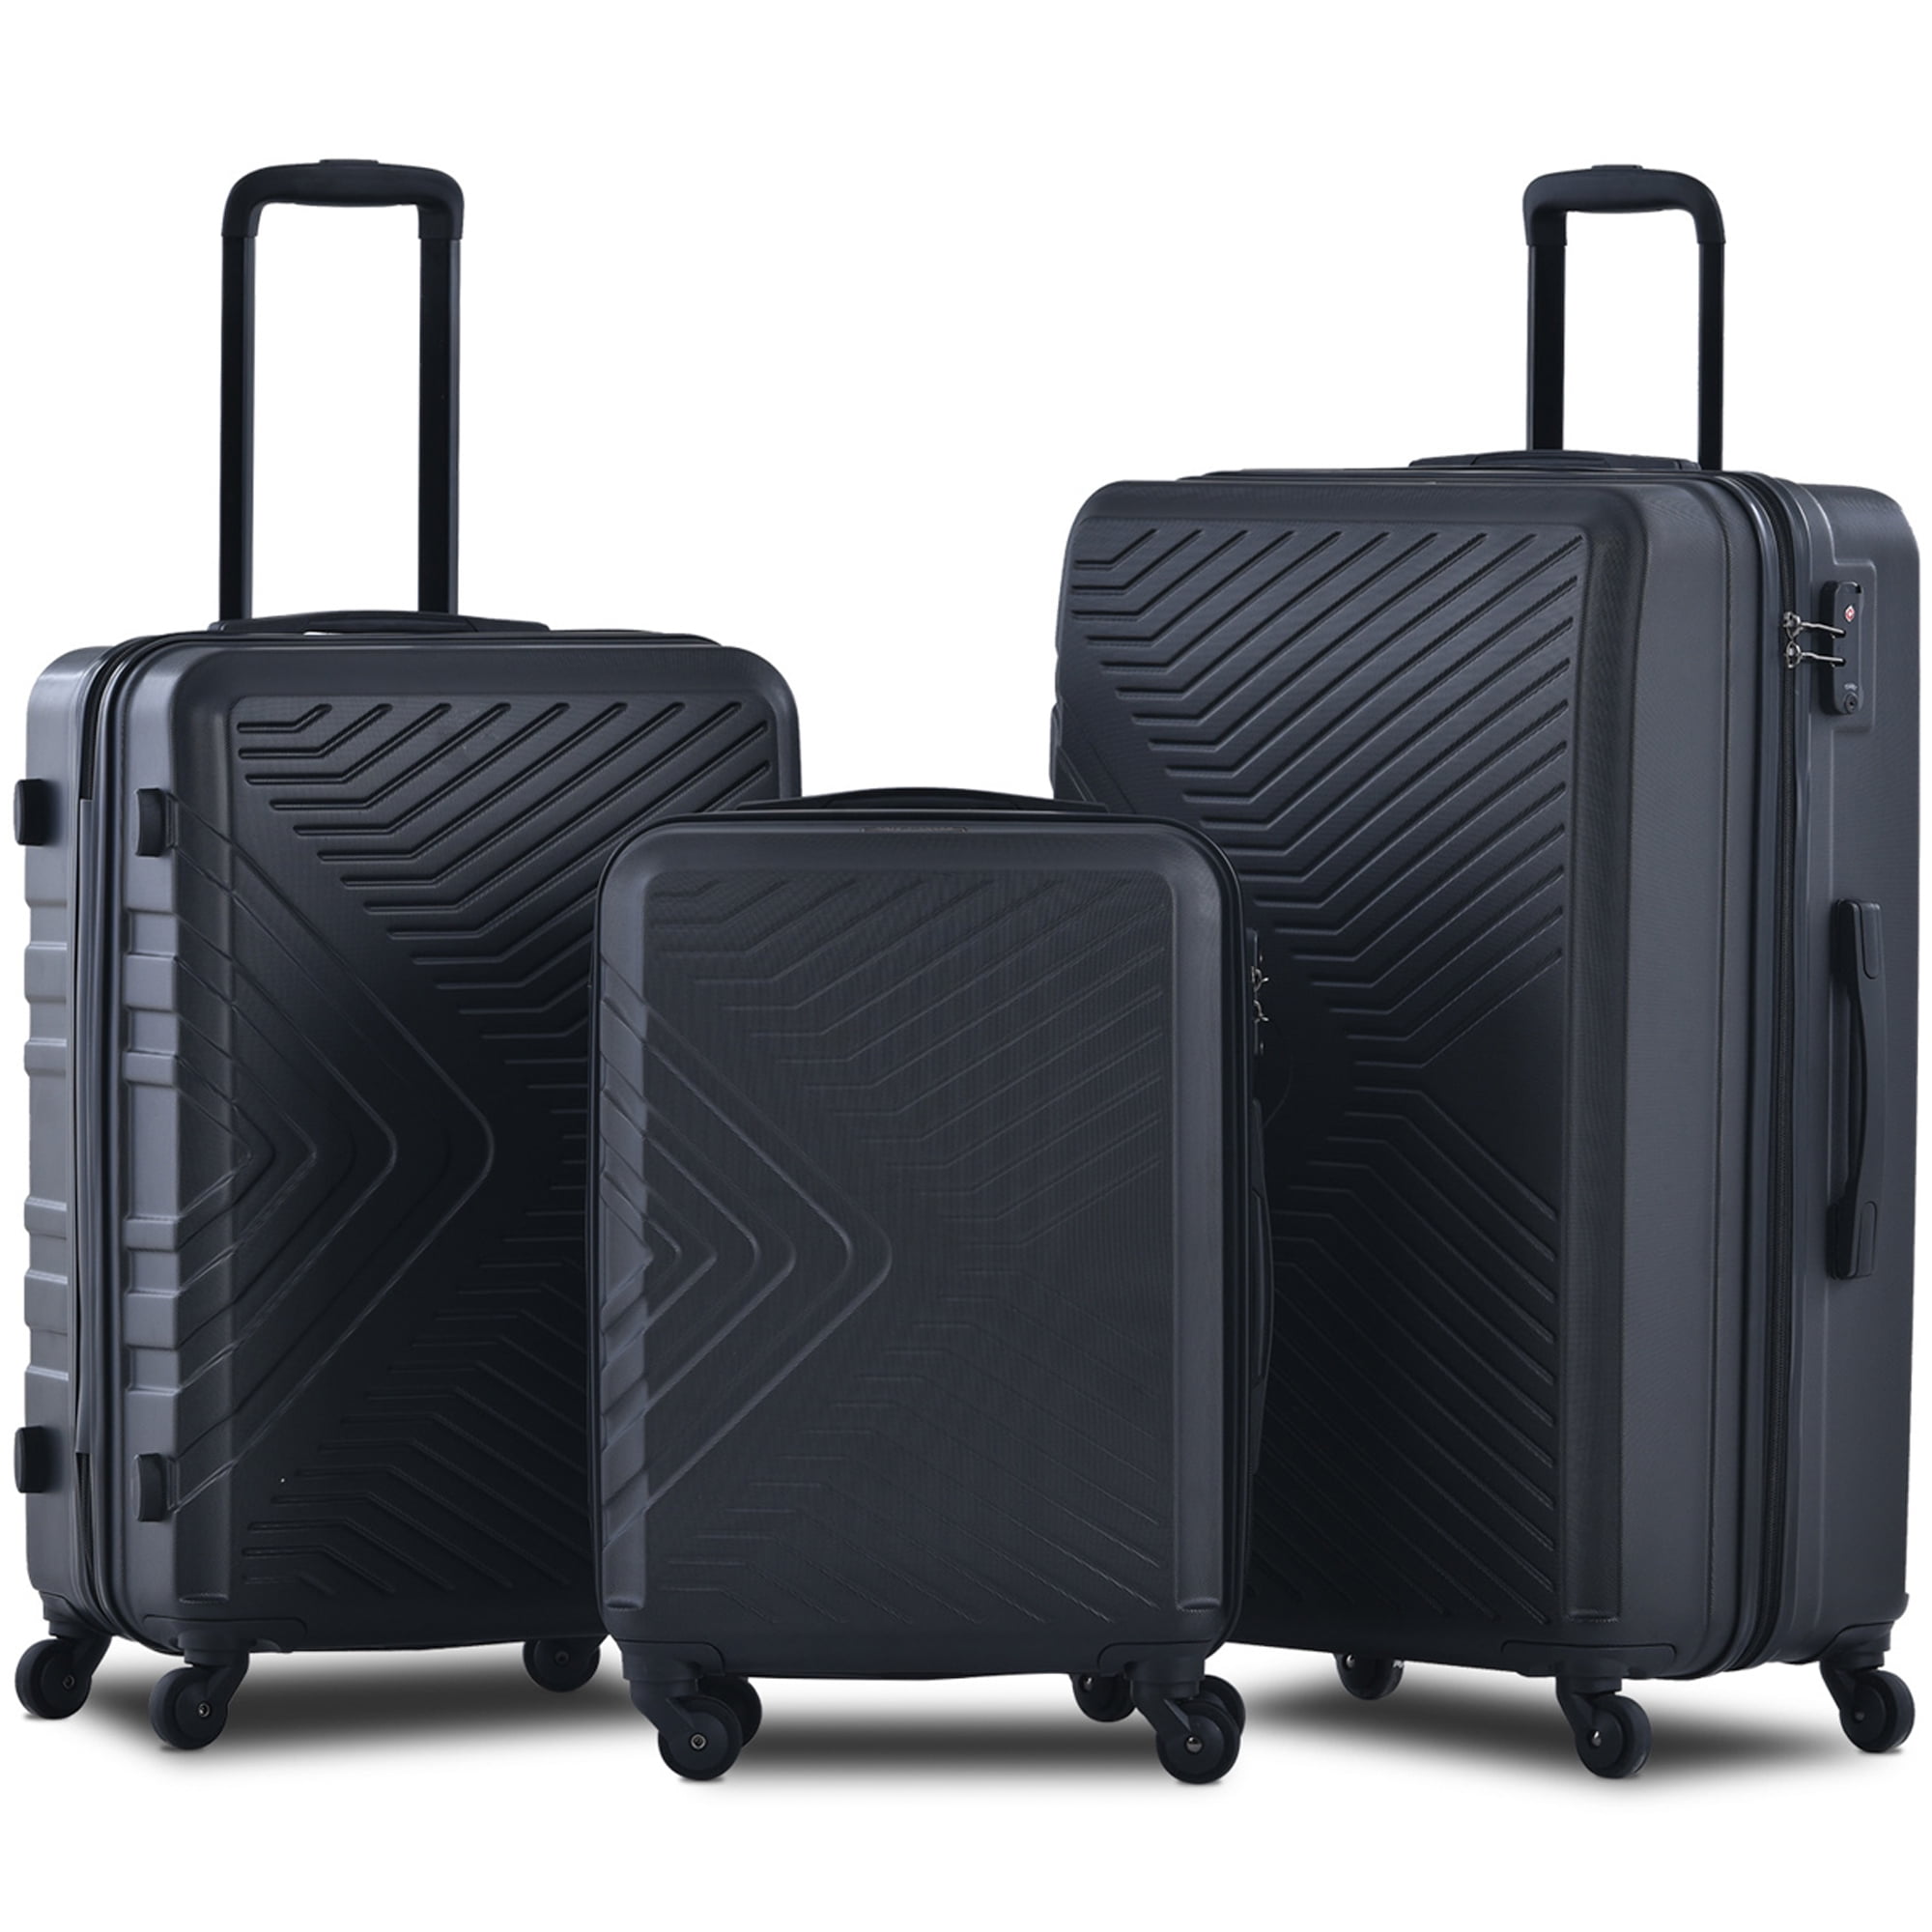 KIVDIT 3 Piece Luggage Sets Hard Shell Suitcase with Spinner Wheels and ...